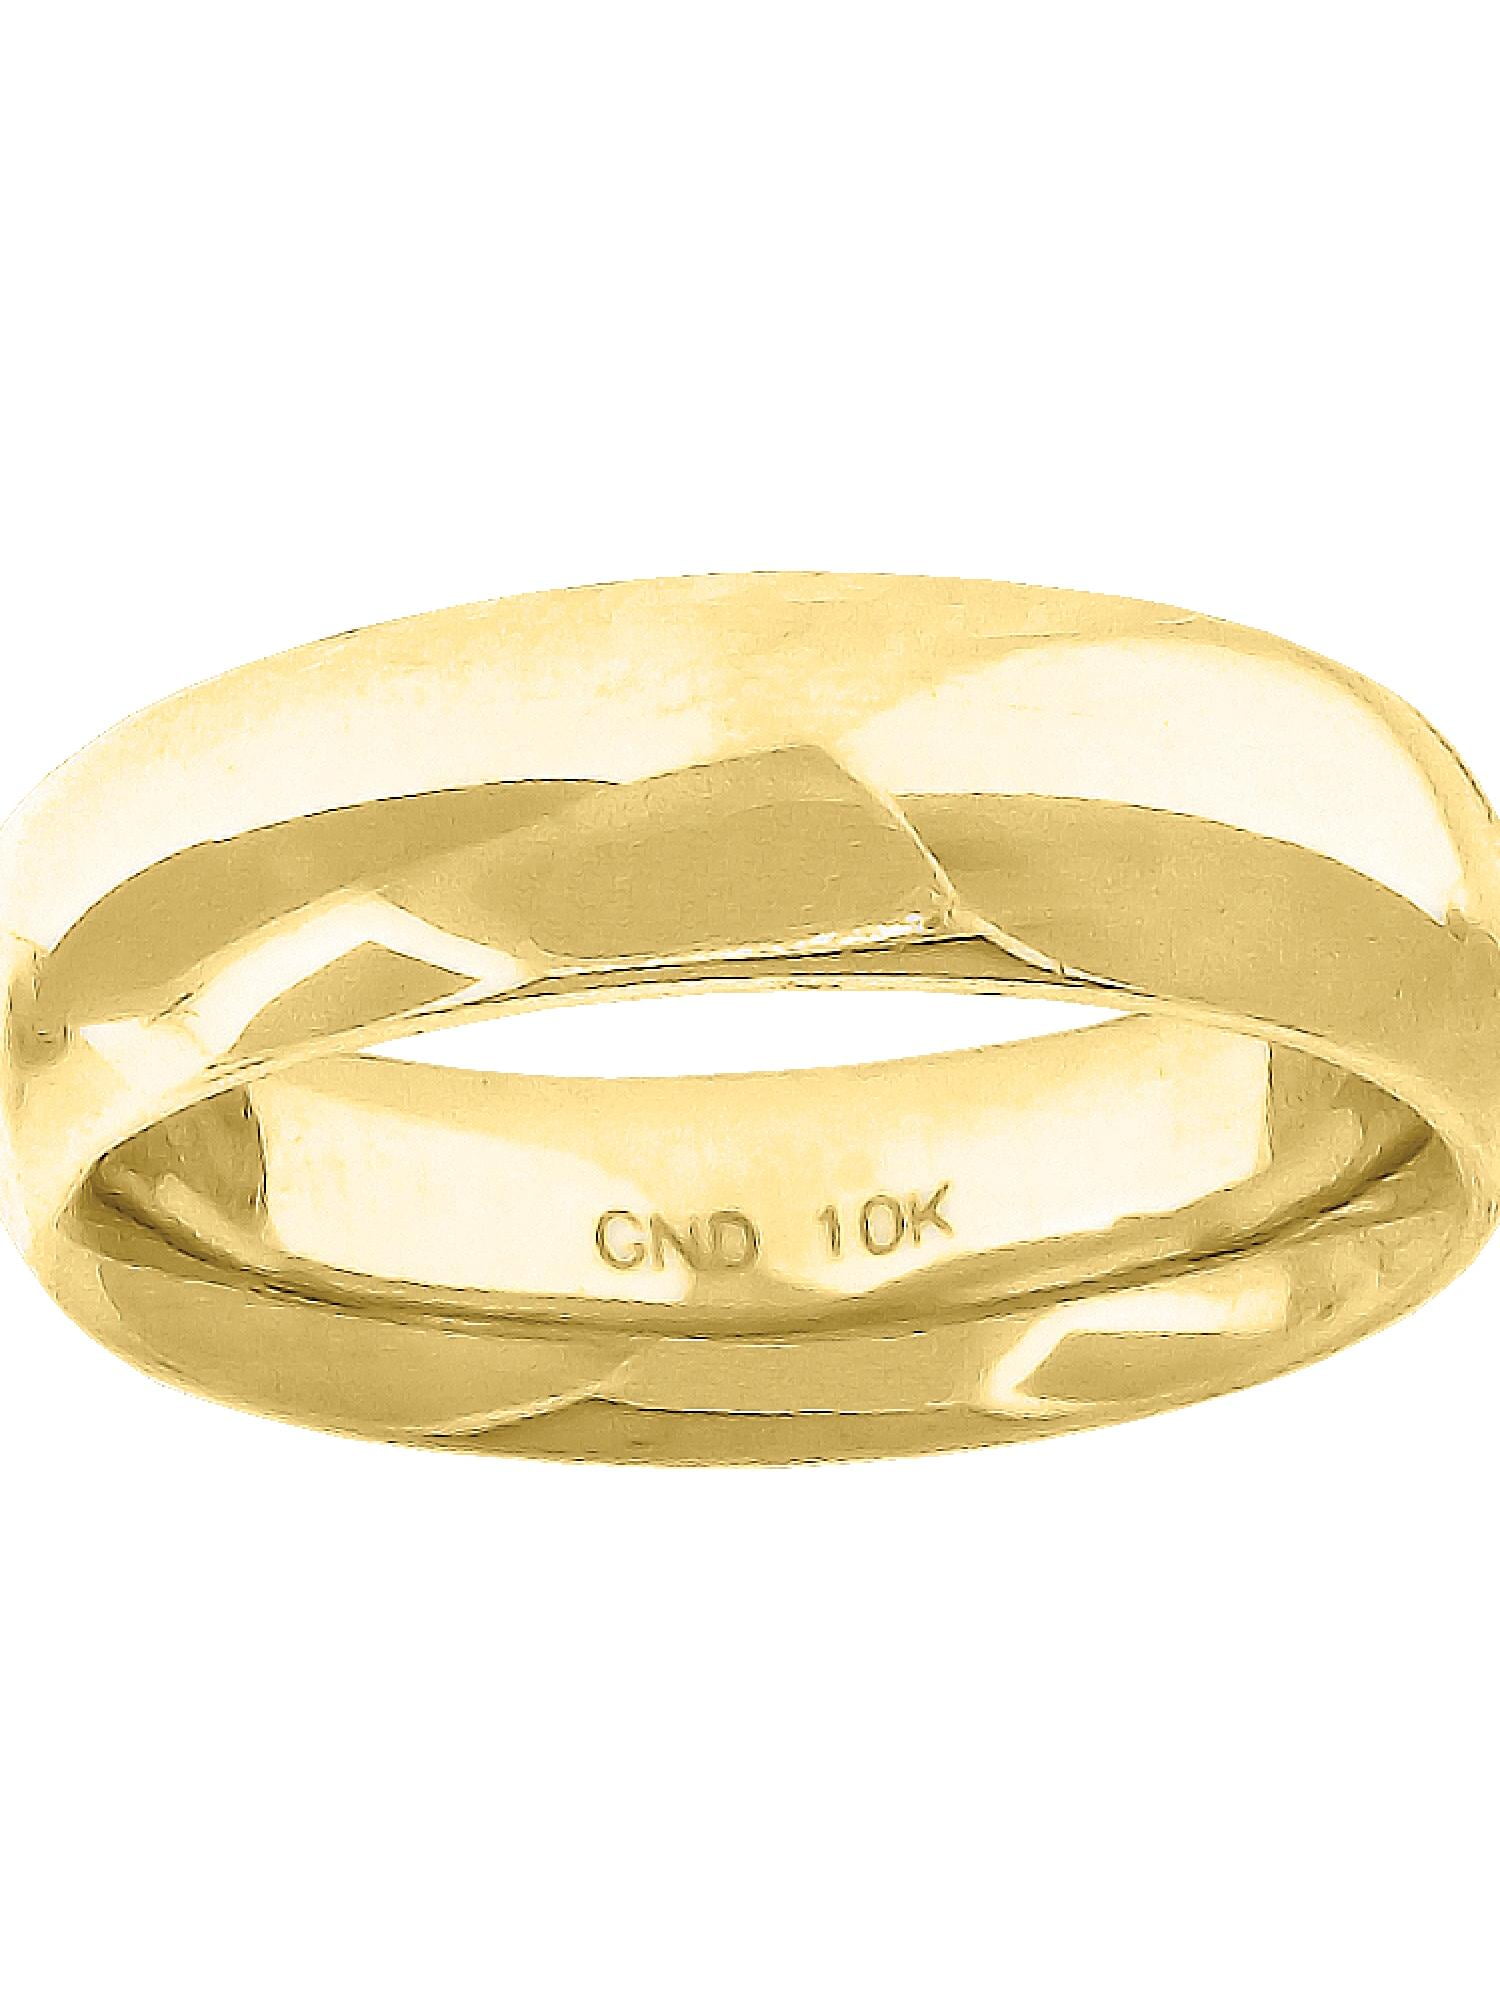 Jewelry Unlimited 10K Yellow Gold Mens Ladies Hollow